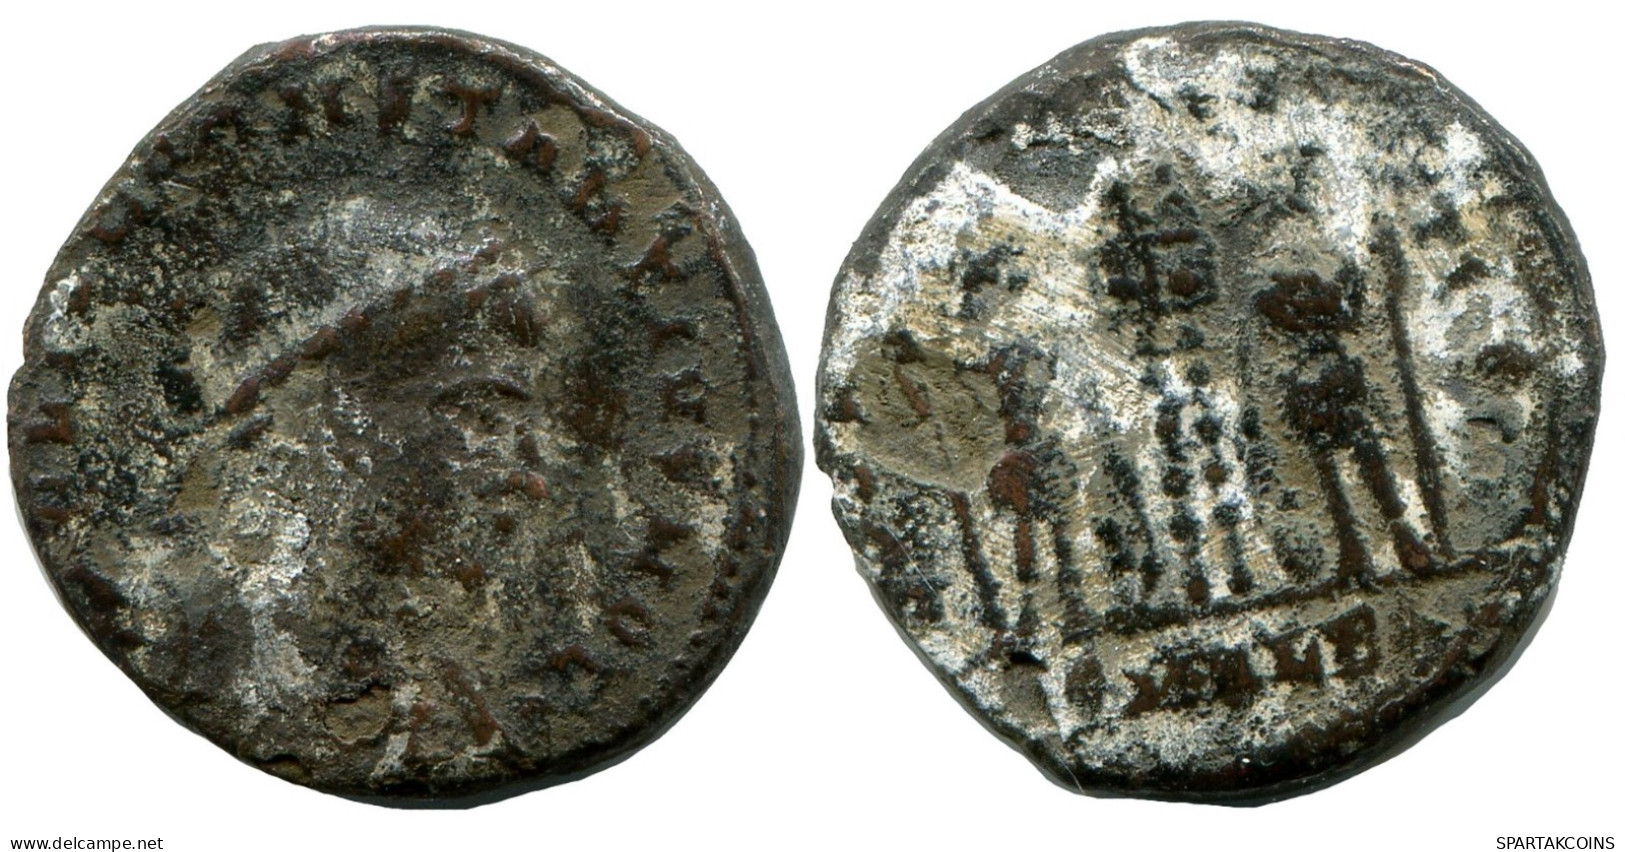 CONSTANTIUS II MINTED IN ALEKSANDRIA FOUND IN IHNASYAH HOARD #ANC10446.14.U.A - The Christian Empire (307 AD To 363 AD)